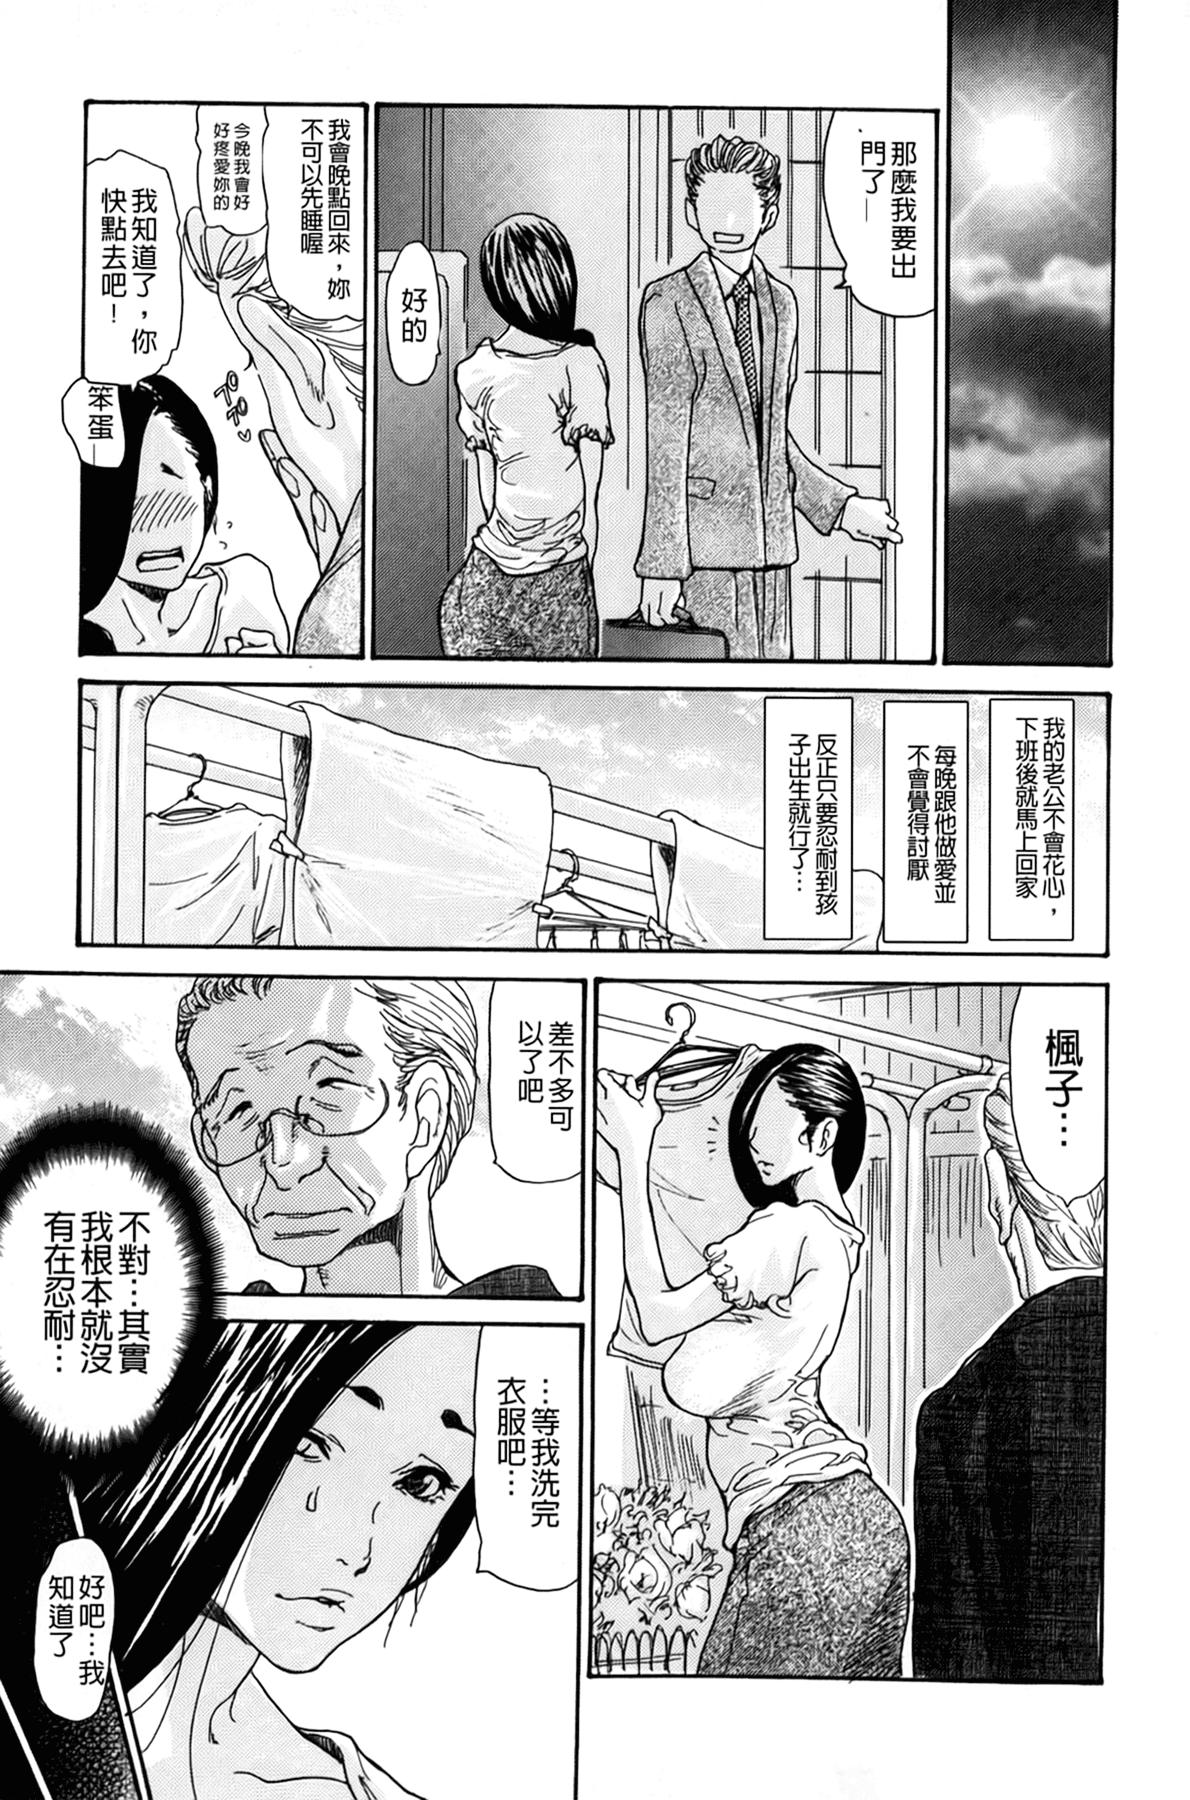 Best Blowjob Zuma Chichi - Breast or Wife | 淫妻艷乳 From - Page 8